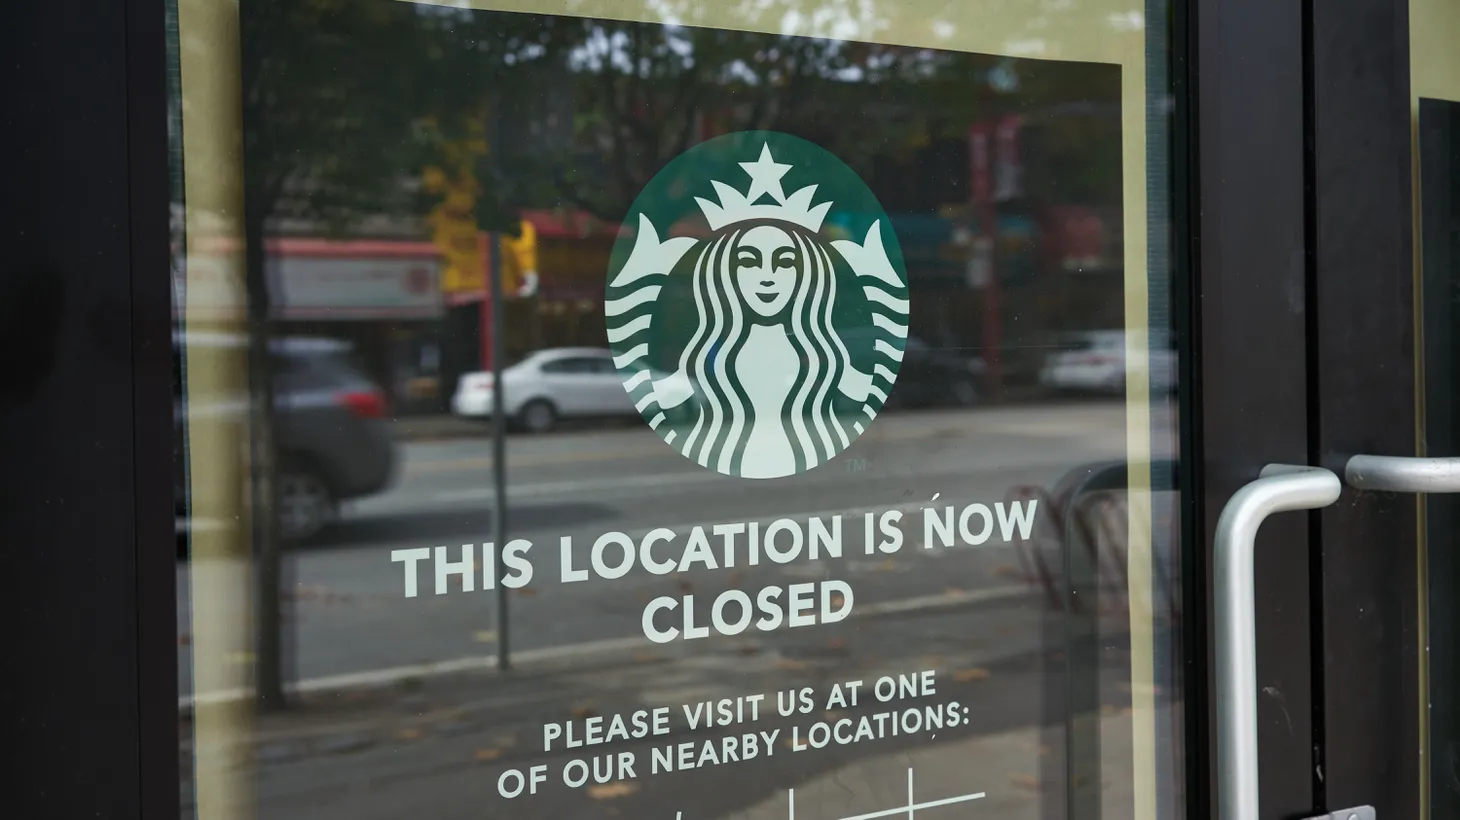 “A handful of workers have reached out and actually did say that there was a lot of danger about their job when working with the public,” Mona Holmes says of Starbucks. “But another person said working in the food service industry has always been challenging. … The timing of it [store closures] and the method which management is taking is what's got everyone second-guessing this rationale around safety.”